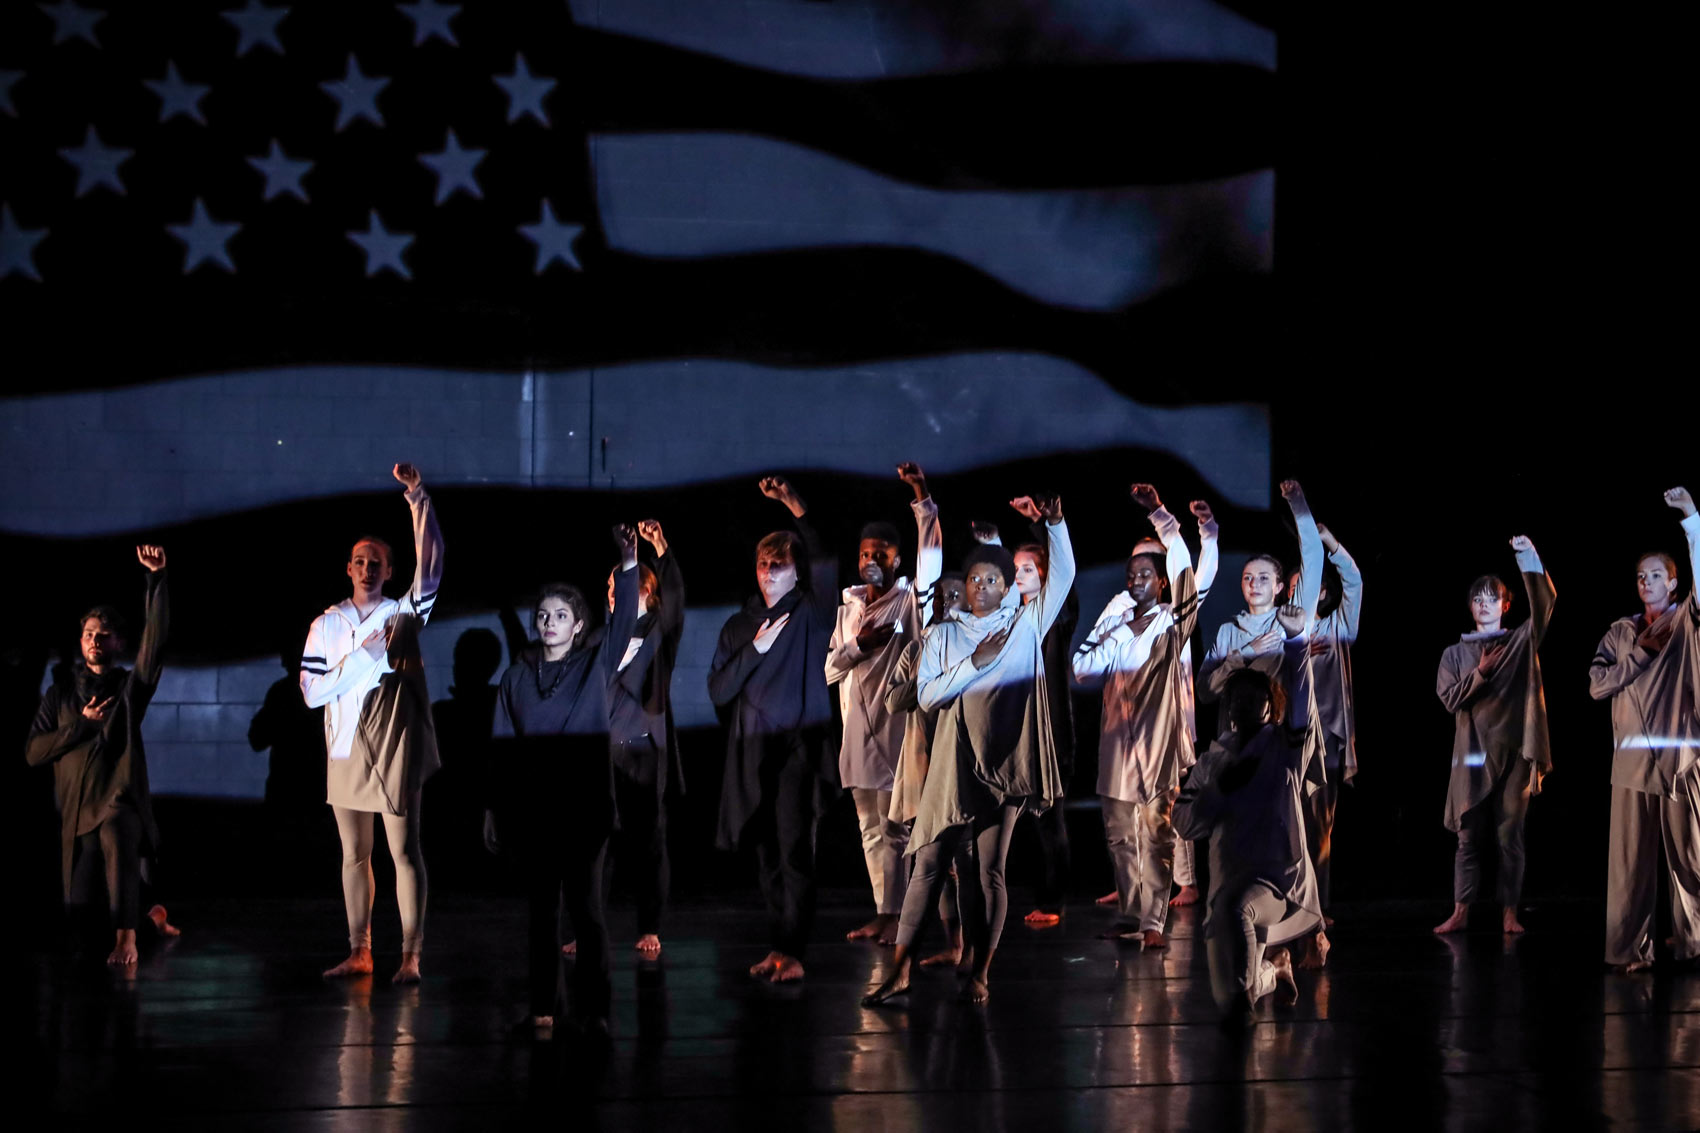 Dancers stand with their fists in the air while the US flag is projected over them.